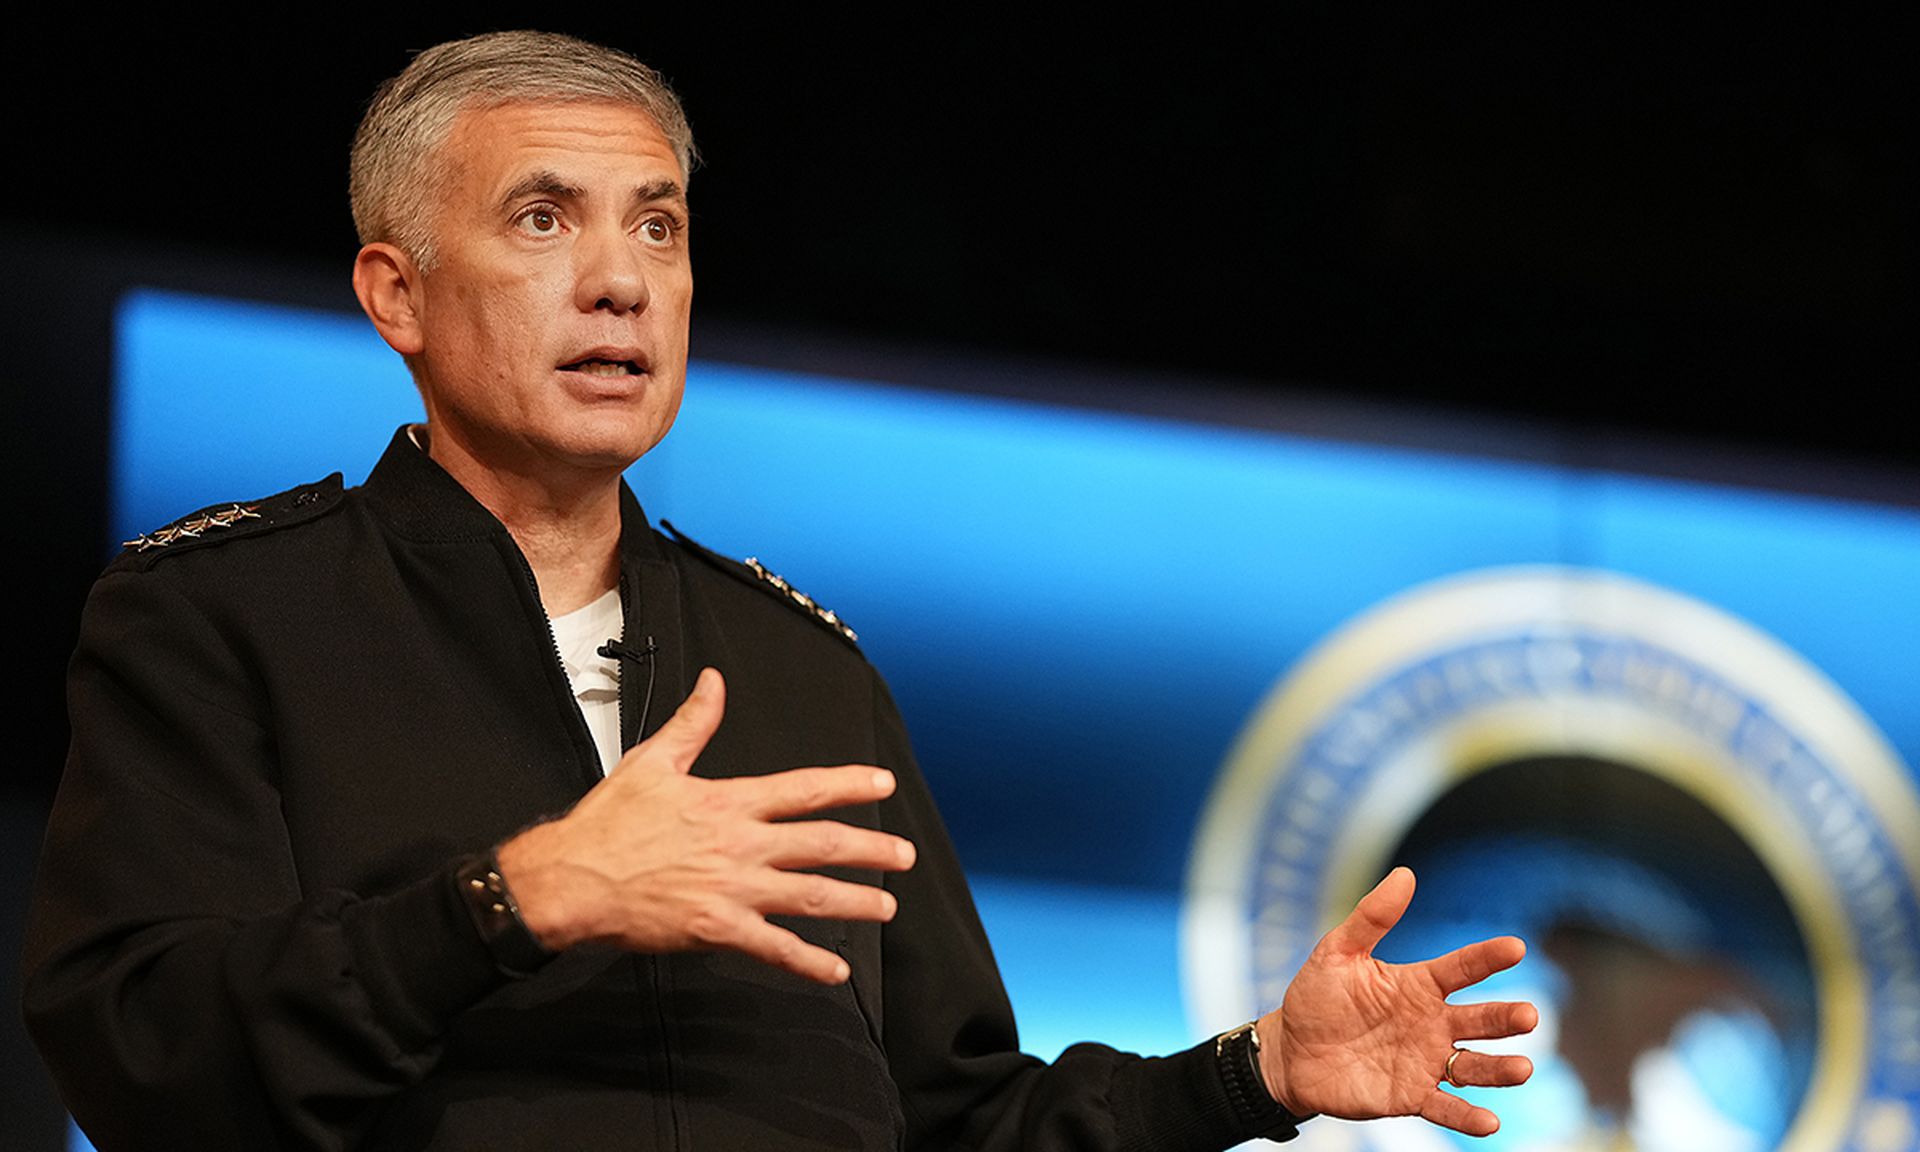 U.S. Army Gen. Paul Nakasone, U.S. Cyber Command  commander and National Security Agency director, presents opening remarks for the 10th annual Reserve Component Summit at Fort George G. Meade, Md., Aug. 20, 2021. (Josef Cole/U.S. Cyber Command)